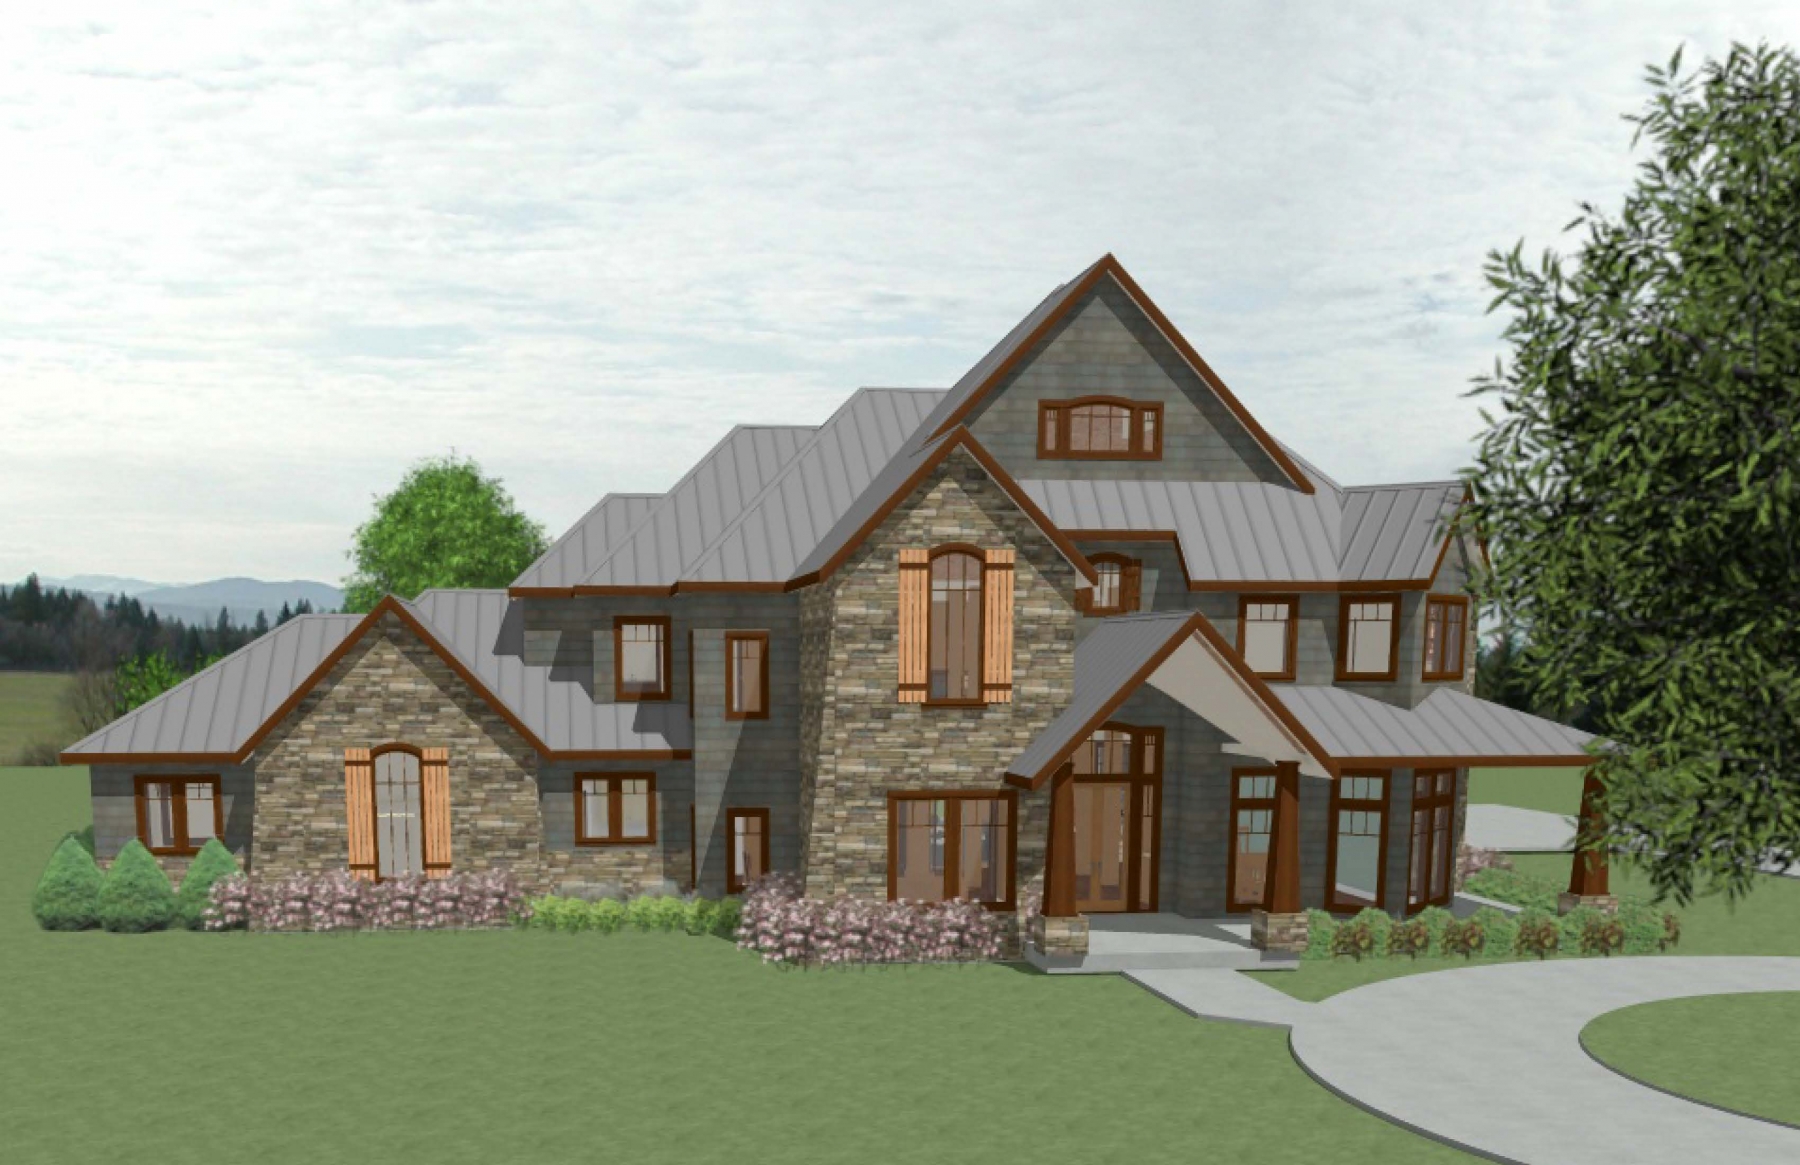 Chief Architect exterior house rendering with grand entrance, stone work, and wooden shutters.